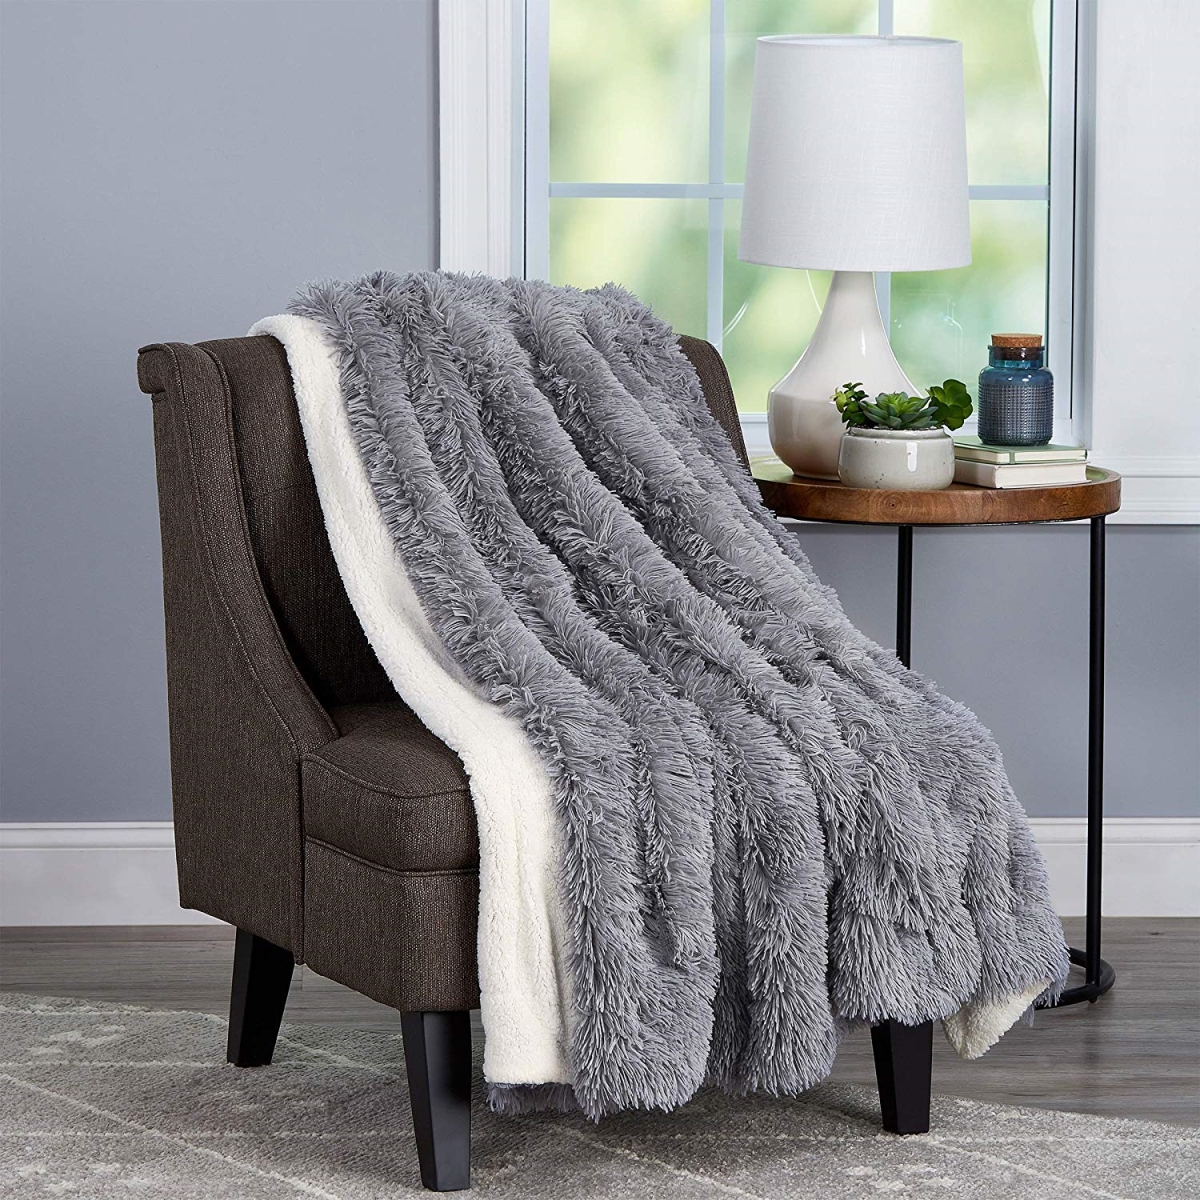 Lavish Home 66-throw029 Soft Hypoallergenic Long Pile Faux Rabbit Fur Blanket With Sherpa Back Throw Luxurious, 60 X 70 In. - Pewter